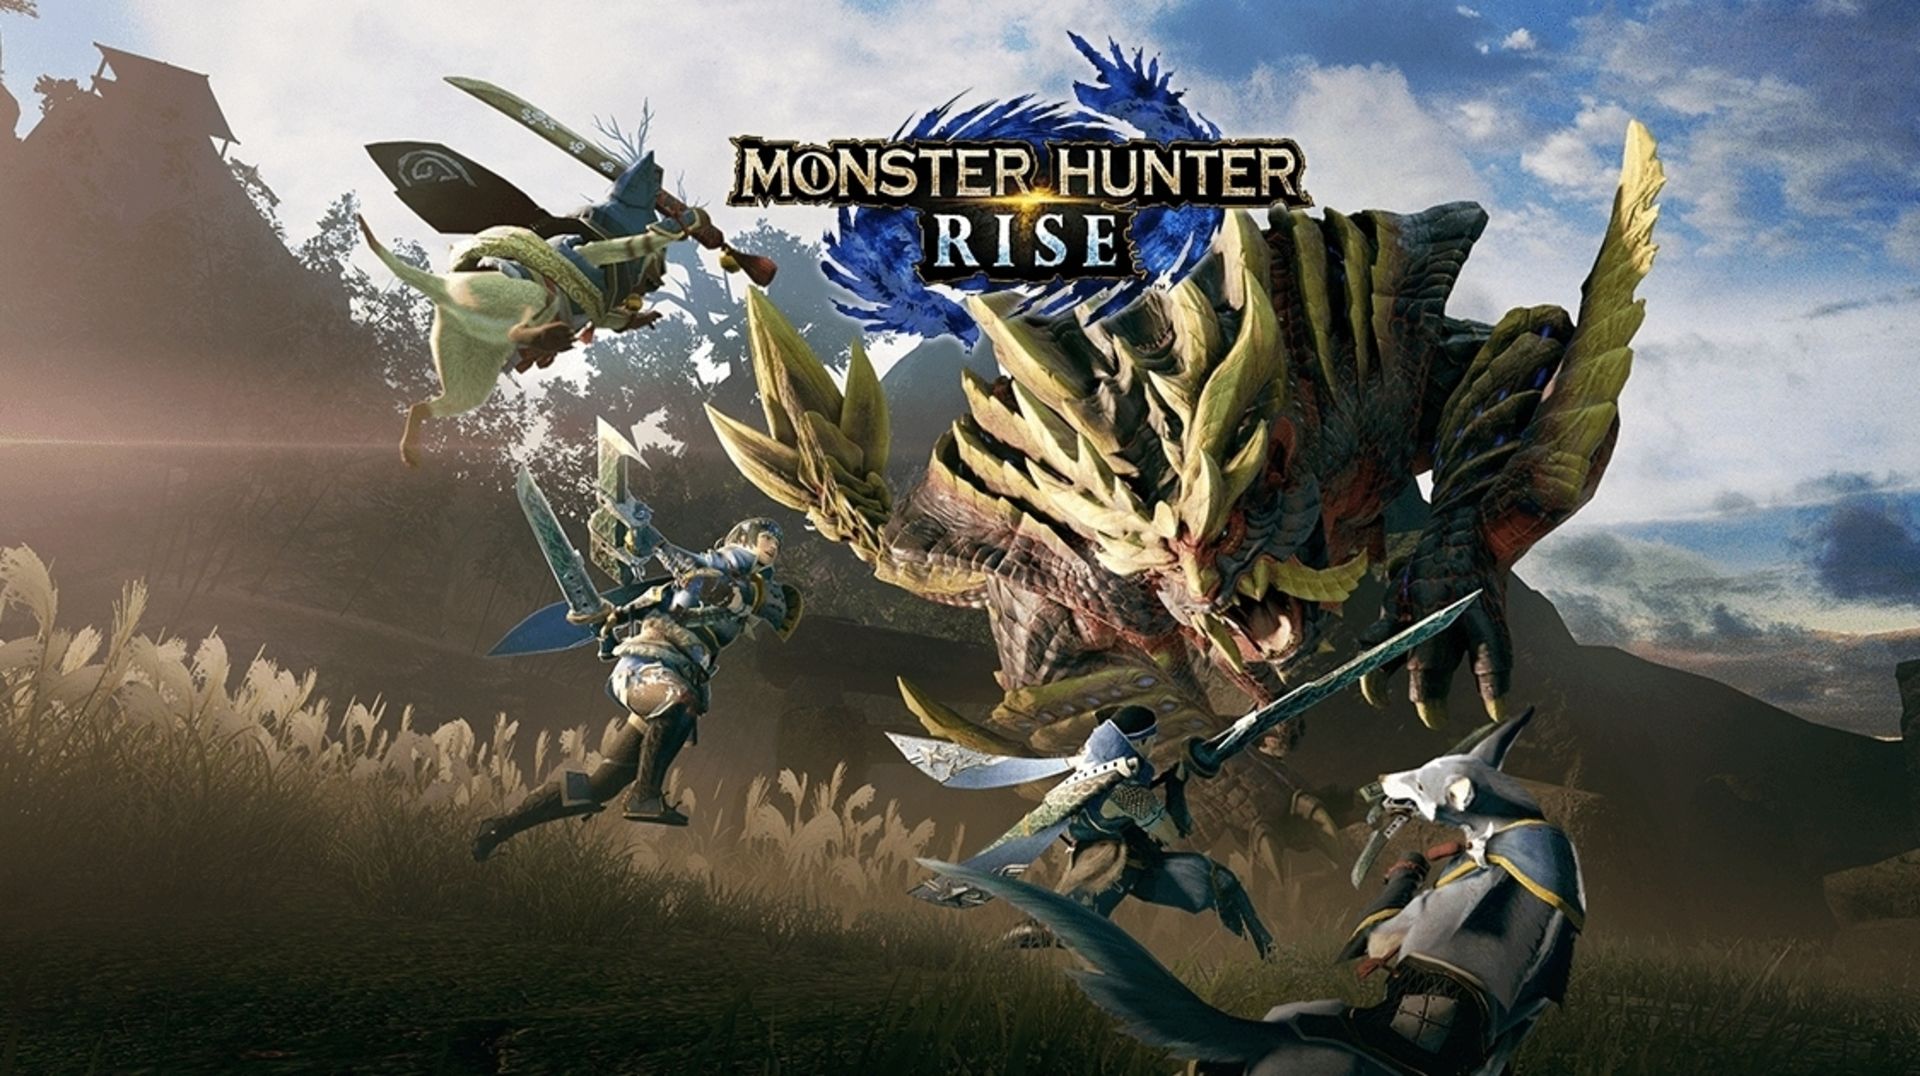 Monster Hunter Rise Review - The rampage grows to more platforms